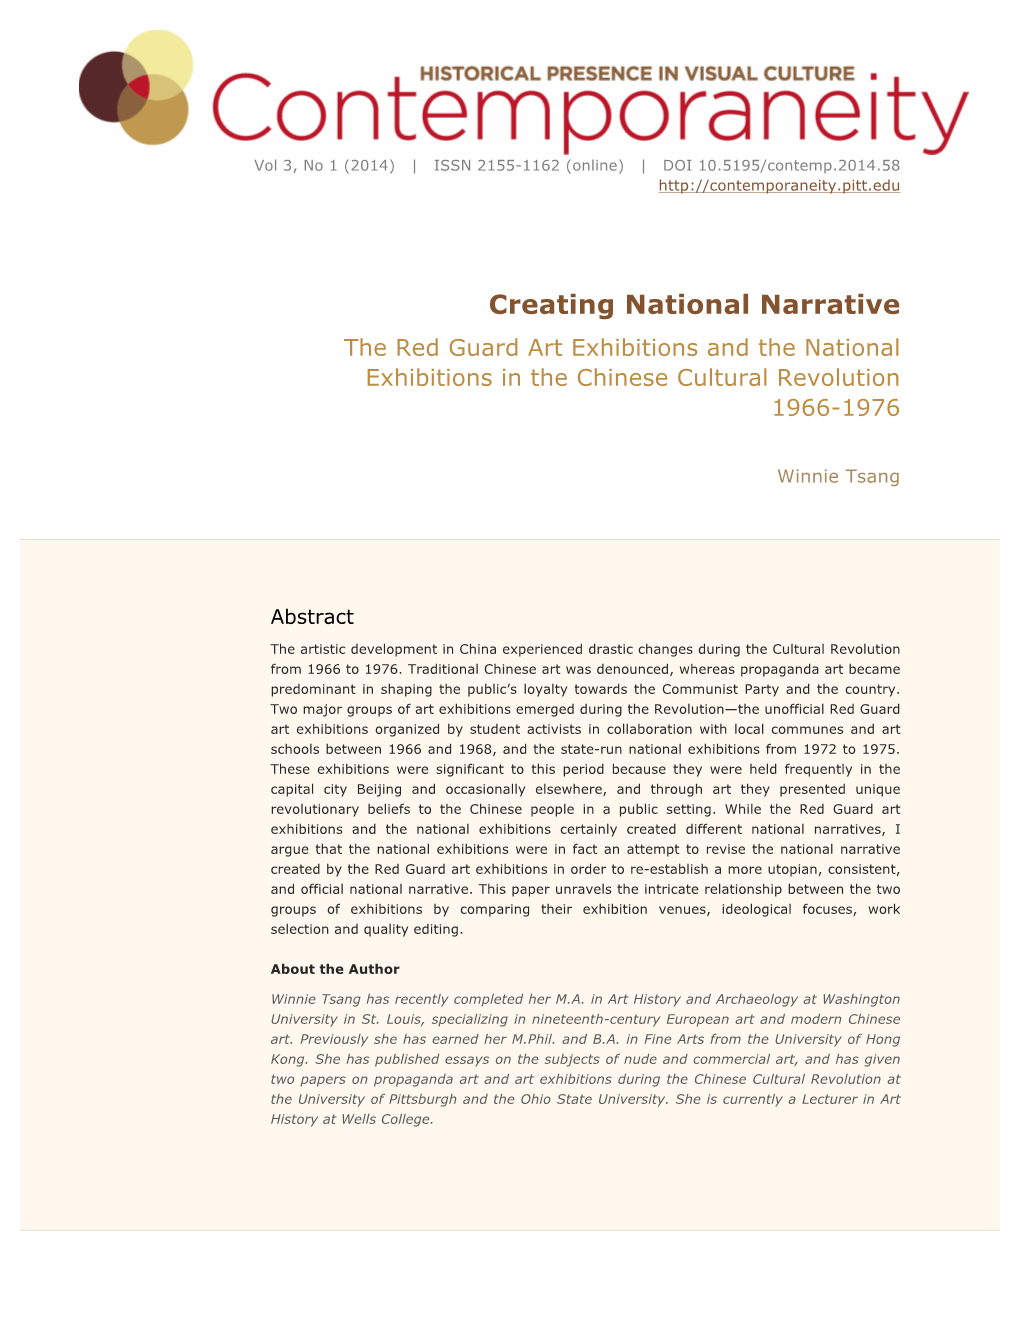 Creating National Narrative the Red Guard Art Exhibitions and the National Exhibitions in the Chinese Cultural Revolution 1966-1976